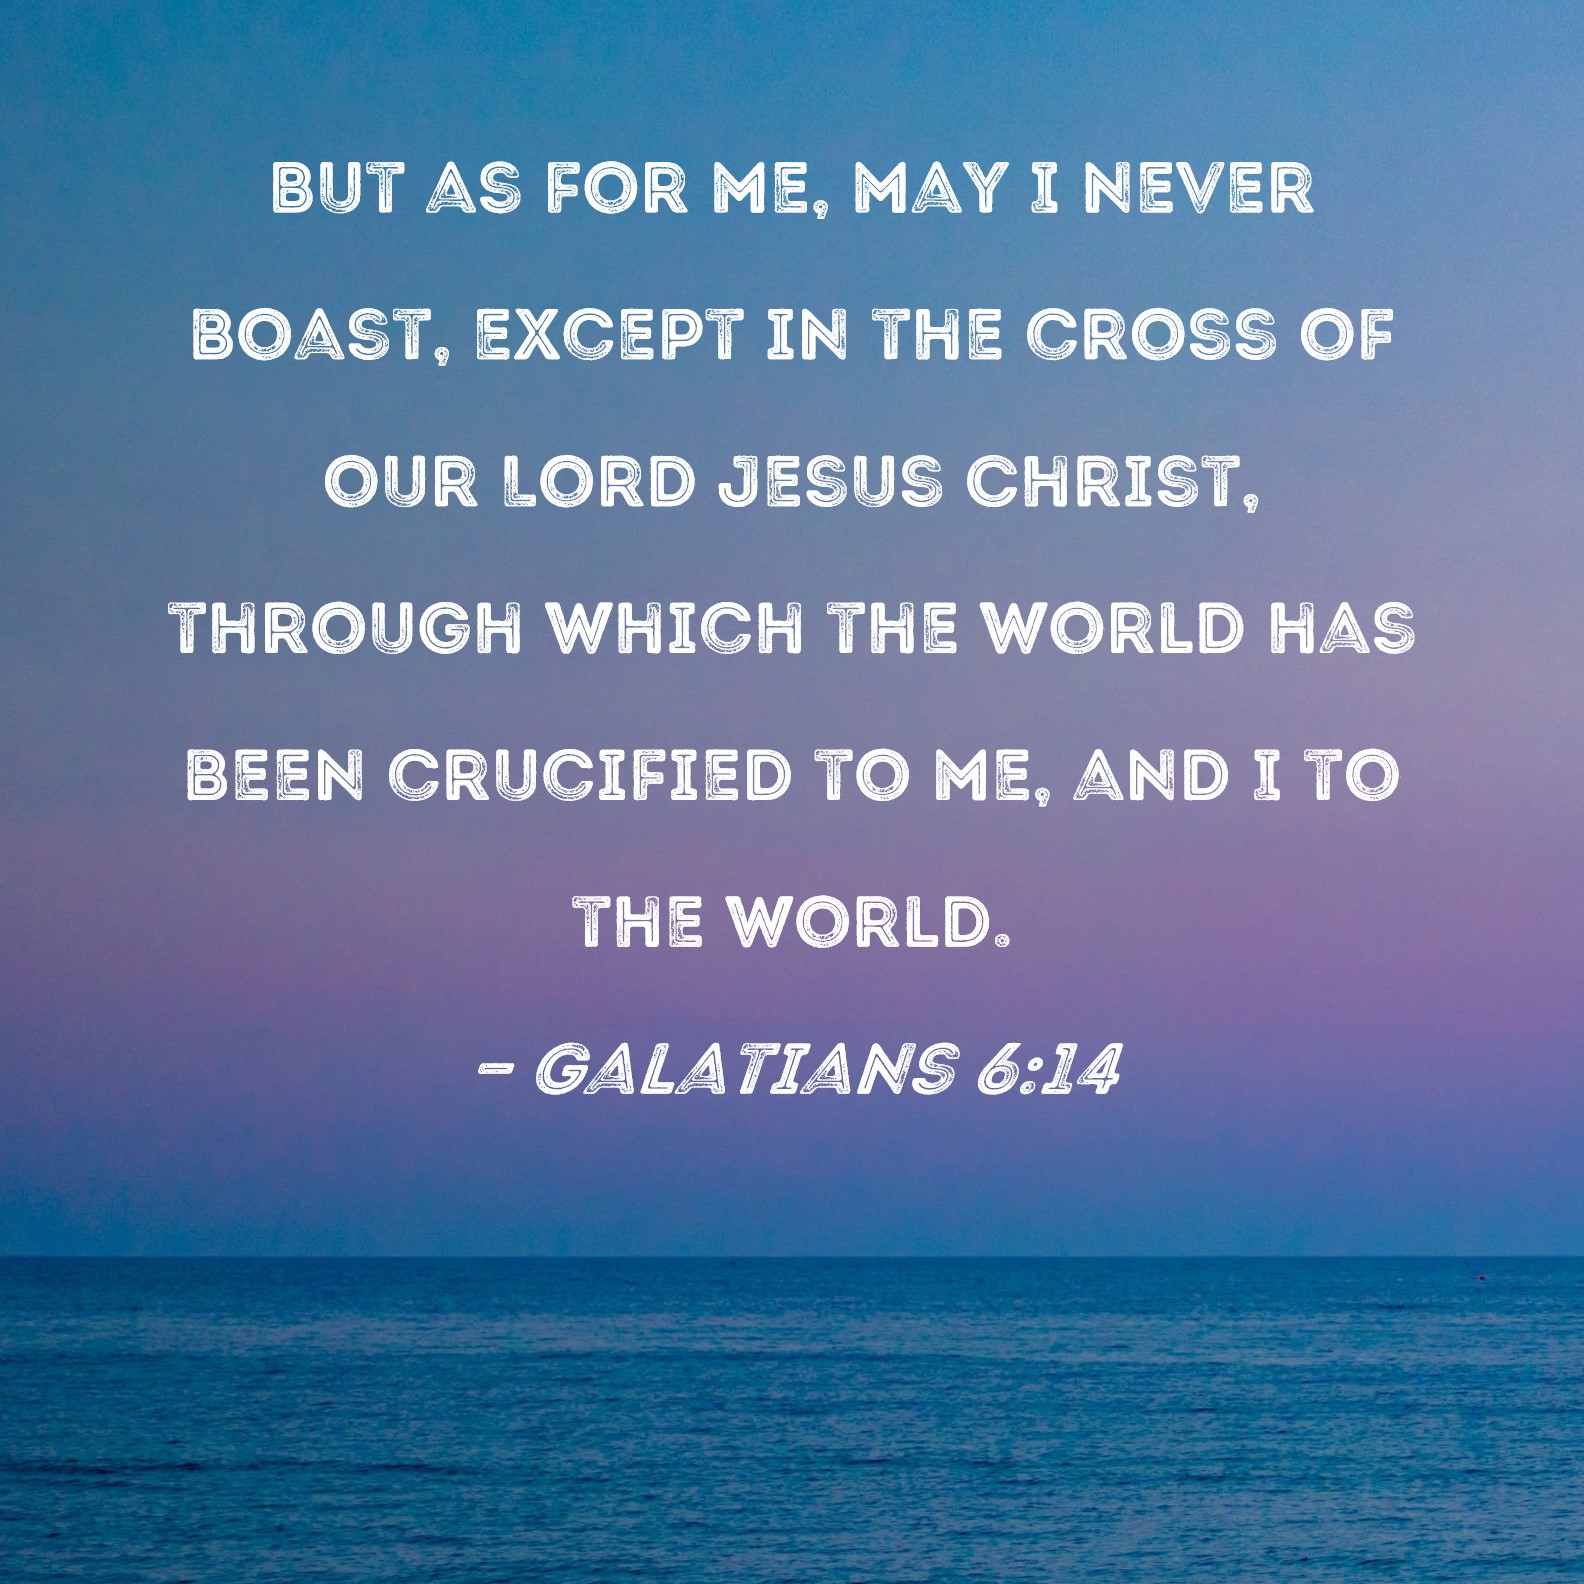 Galatians 6:14 But as for me, may I never boast, except in the